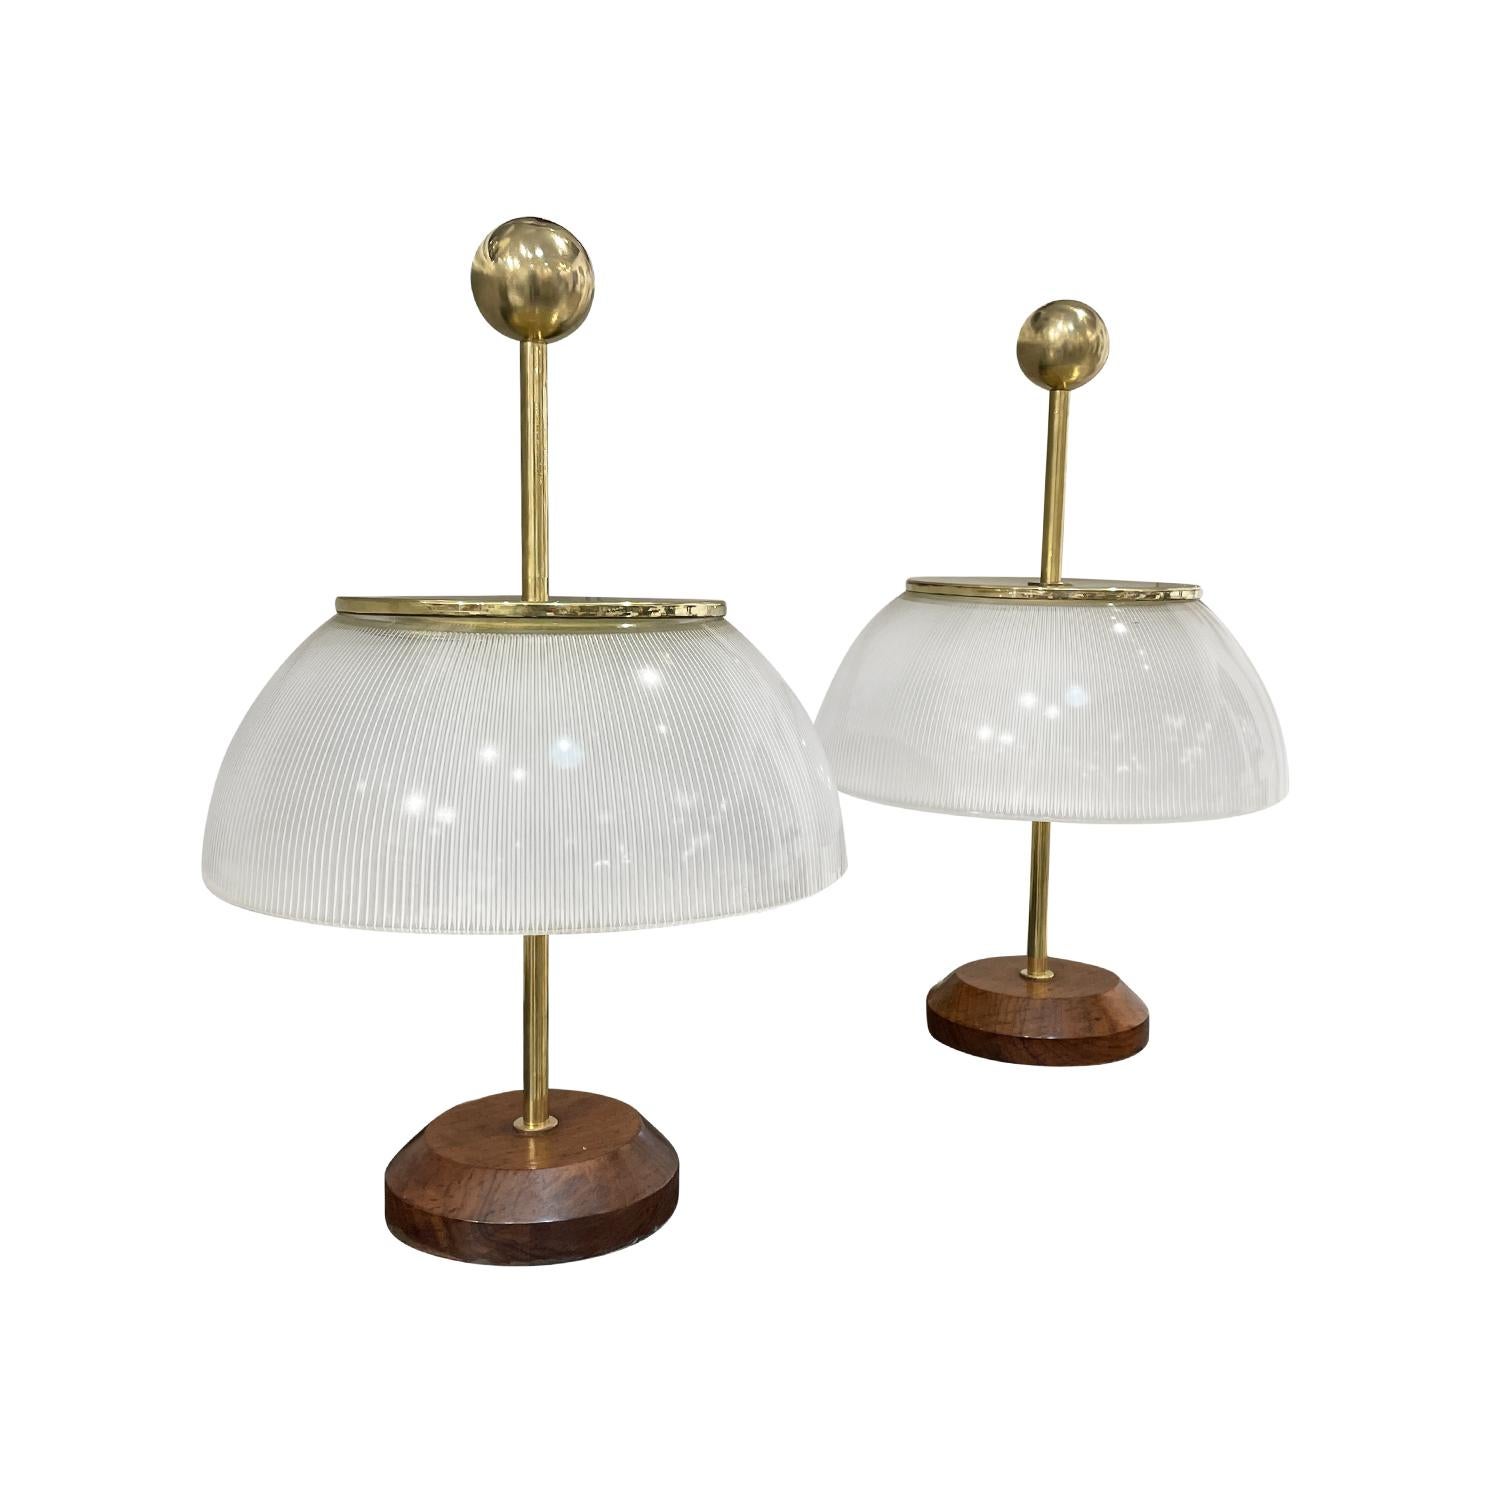 A vintage Mid-Century modern Italian pair of table lamps, model Alfa are made of hand blown Murano glass, designed by Sergio Mazza and produced by Artemide, in good condition. The slightly smoked round shades of the desk lights are enhanced by a